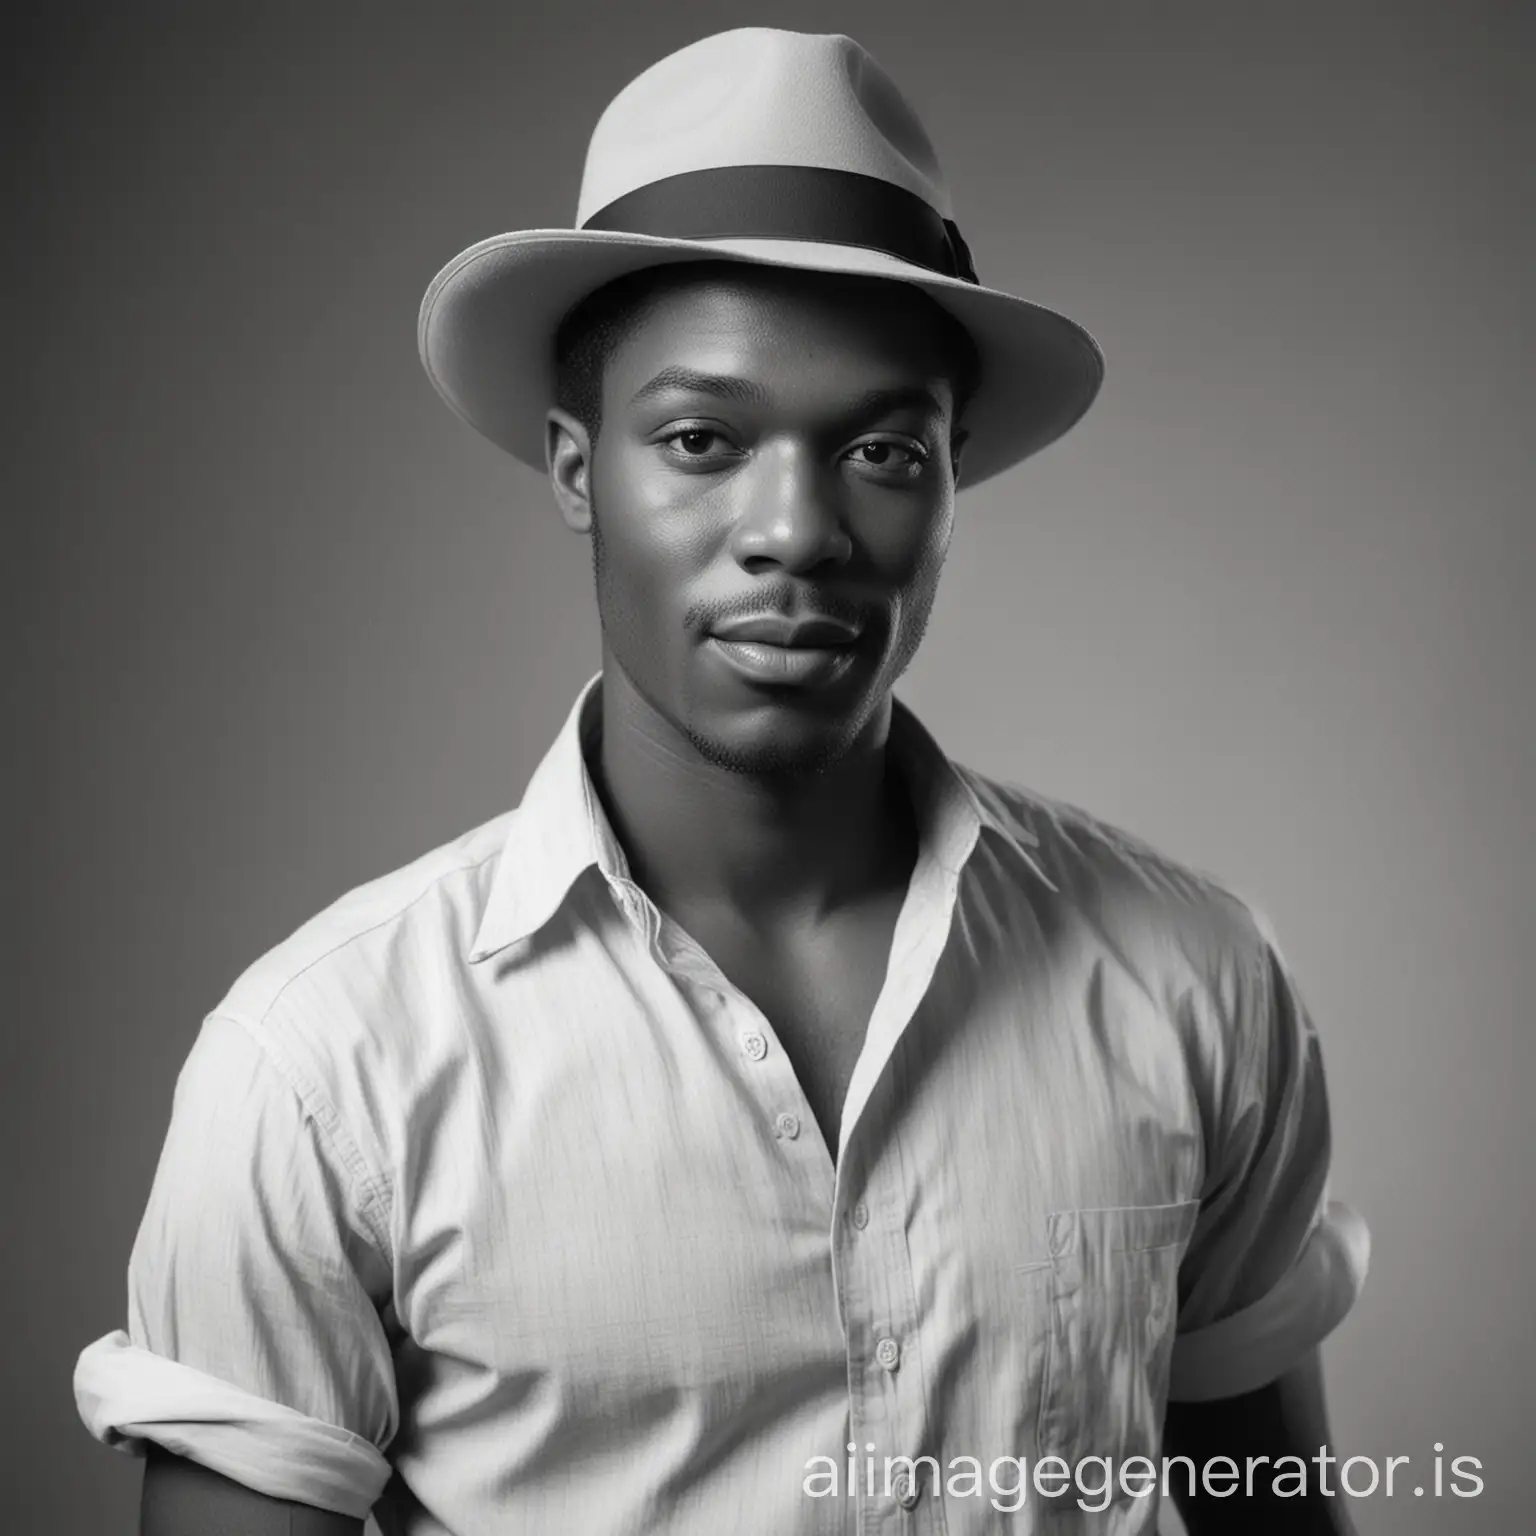 Stylish-African-American-Man-in-1950s-Casual-Attire-and-Fedora